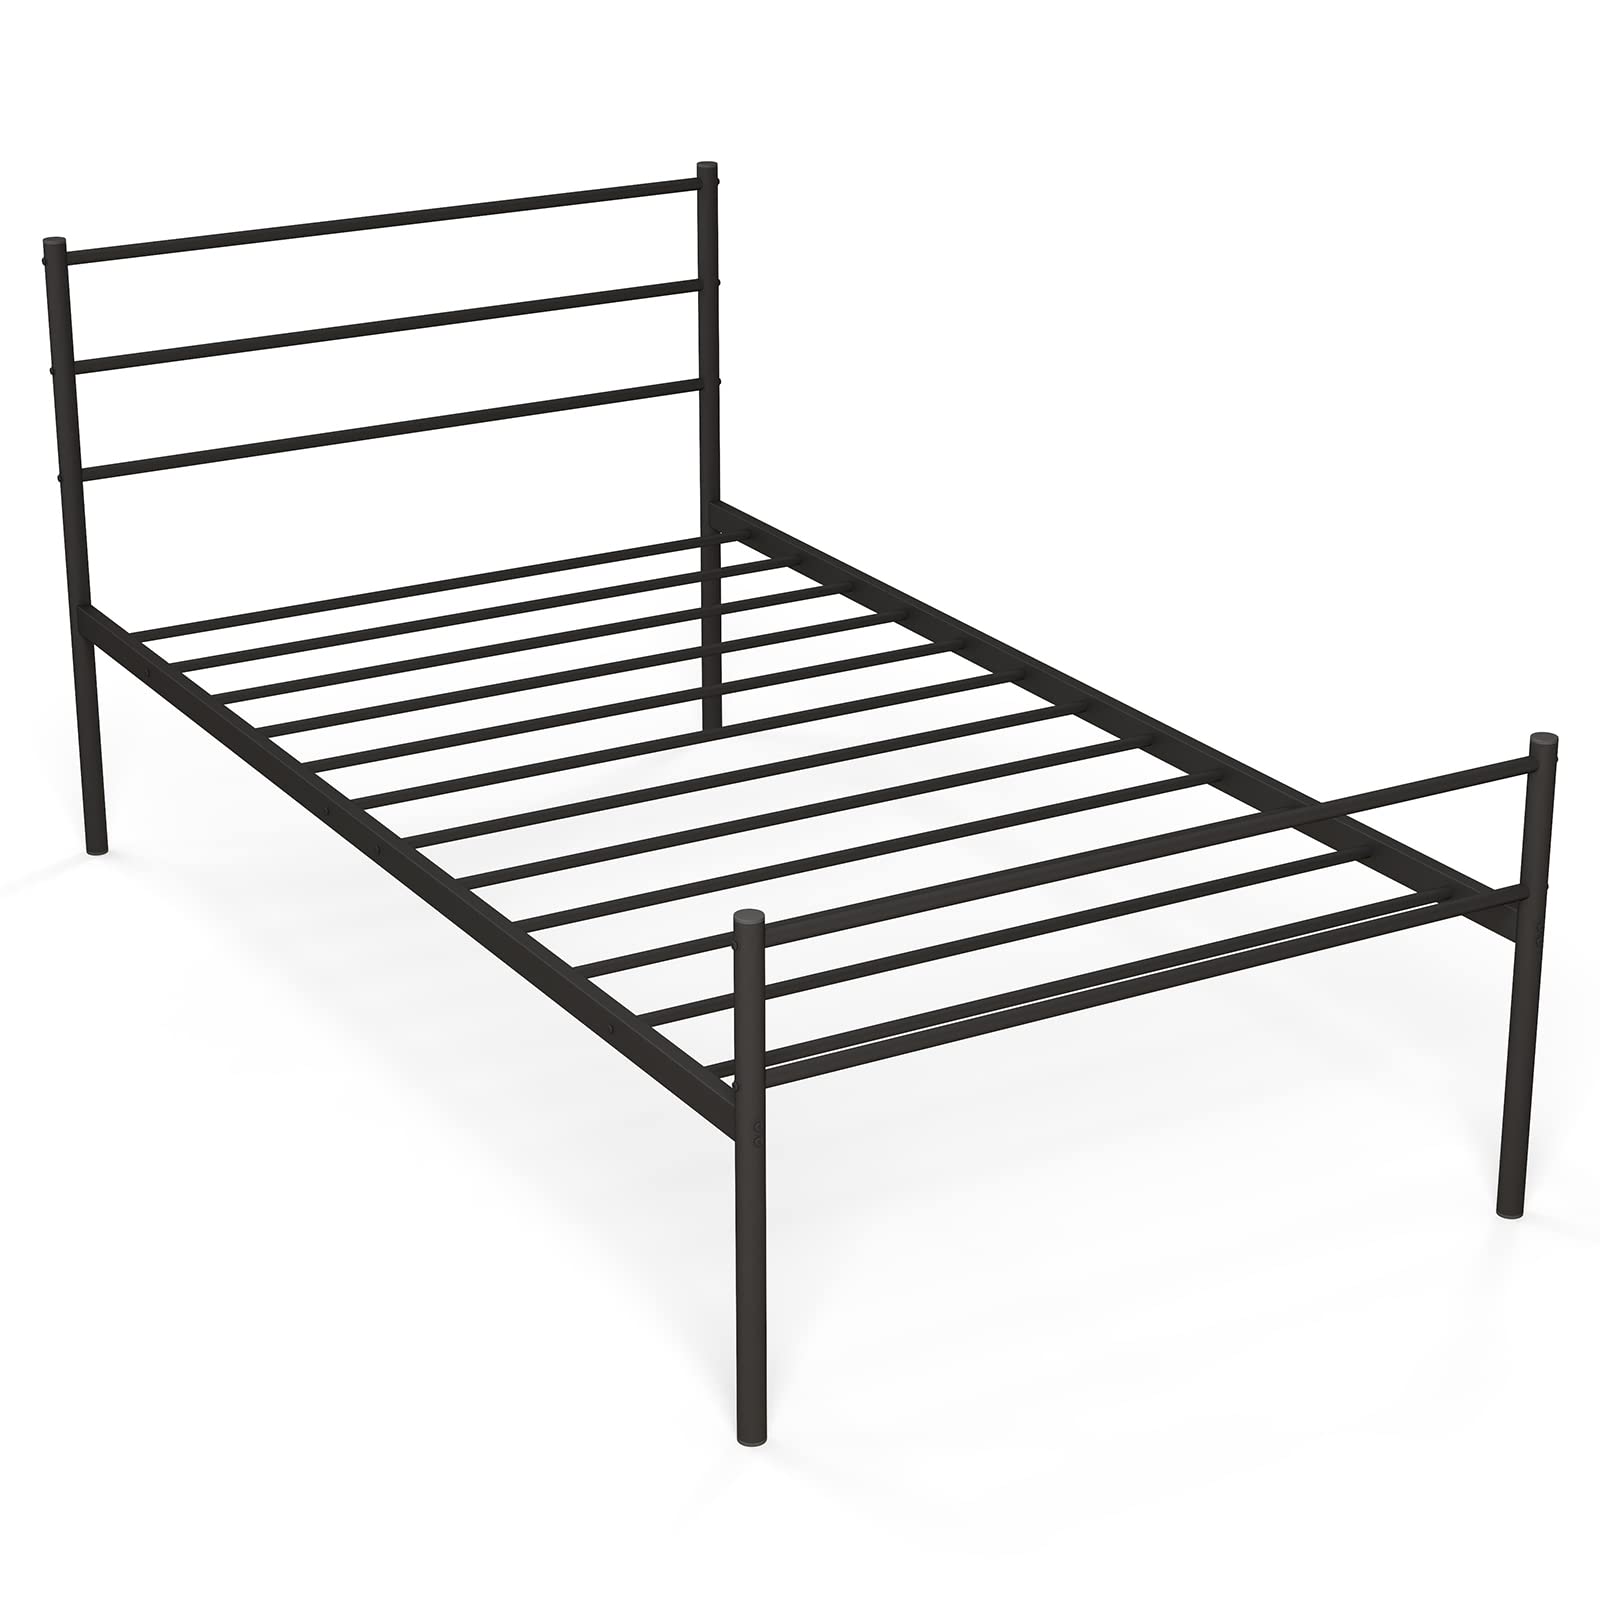 Giantex Twin Size Metal Bed Frame with Headboard & Footboard, 13.5 Inch Platform Bed Frame